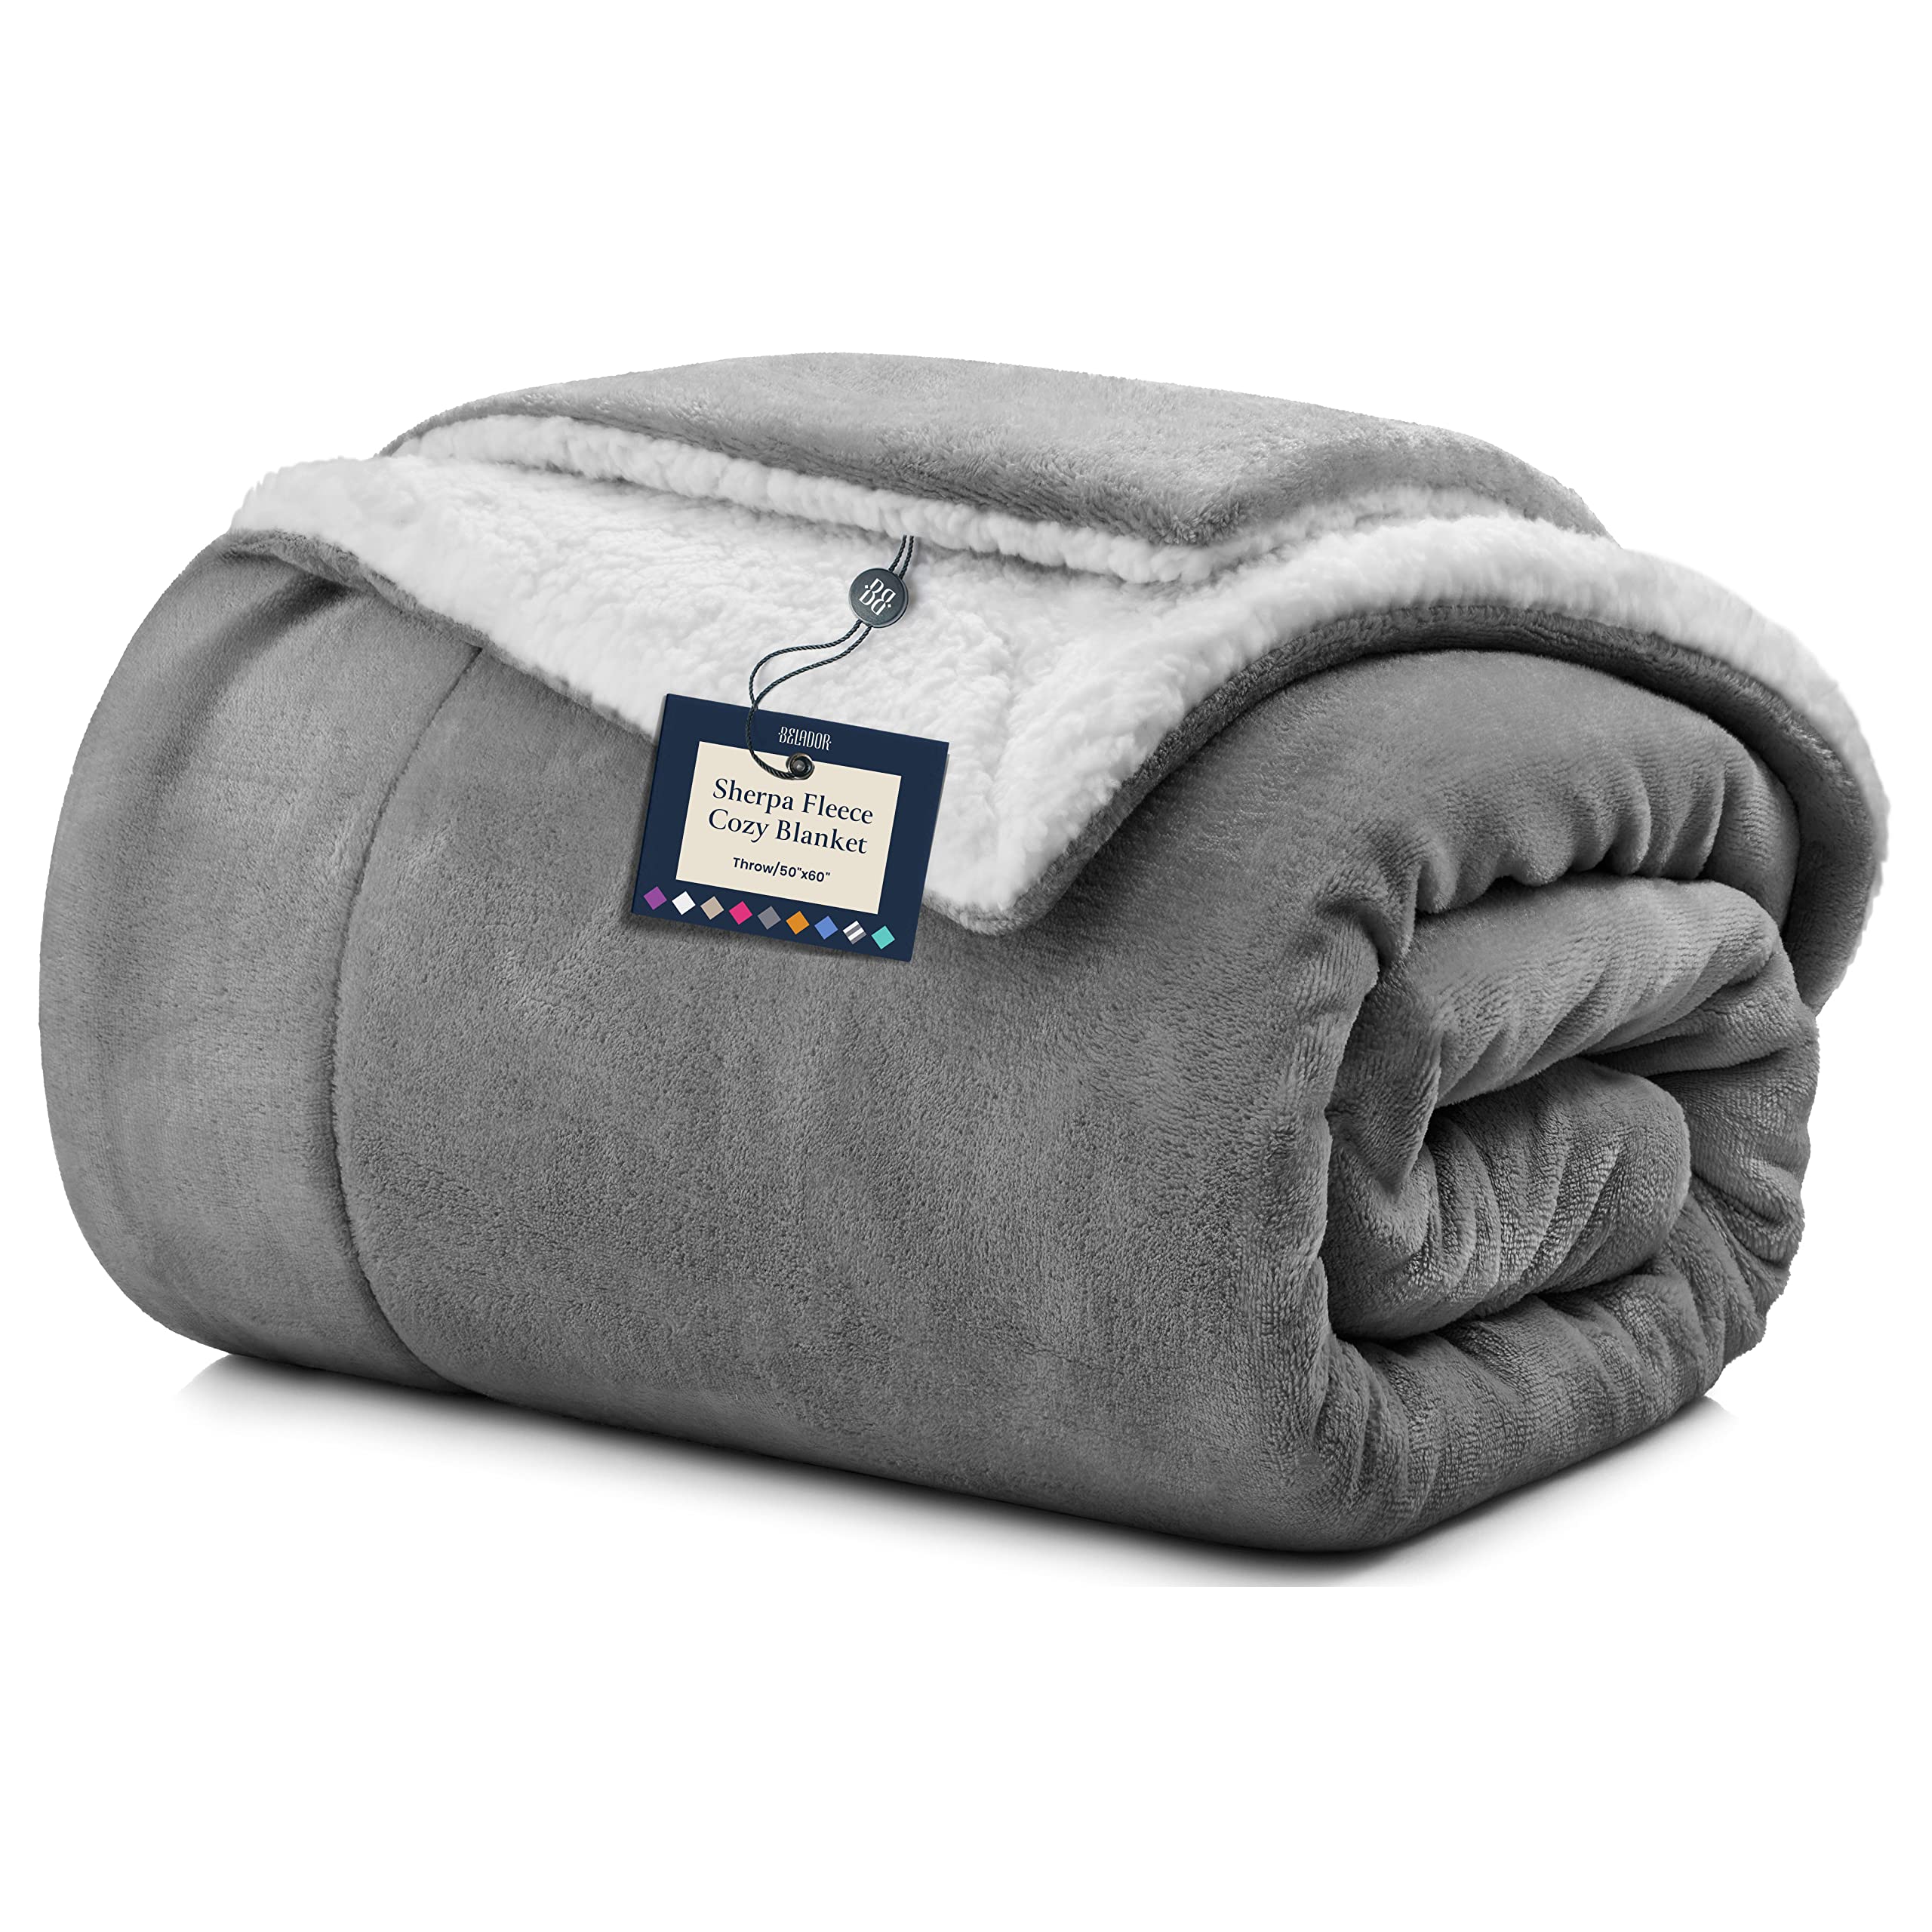 BELADOR Throw Blanket - Fleece Blankets - Soft Blanket with Sherpa Reverse Fluff - Travel Blanket for Bed, Anti-Static Blankets & Throws - Plush Lightweight Blanket, Cozy Fuzzy Couch Blanket  - Like New